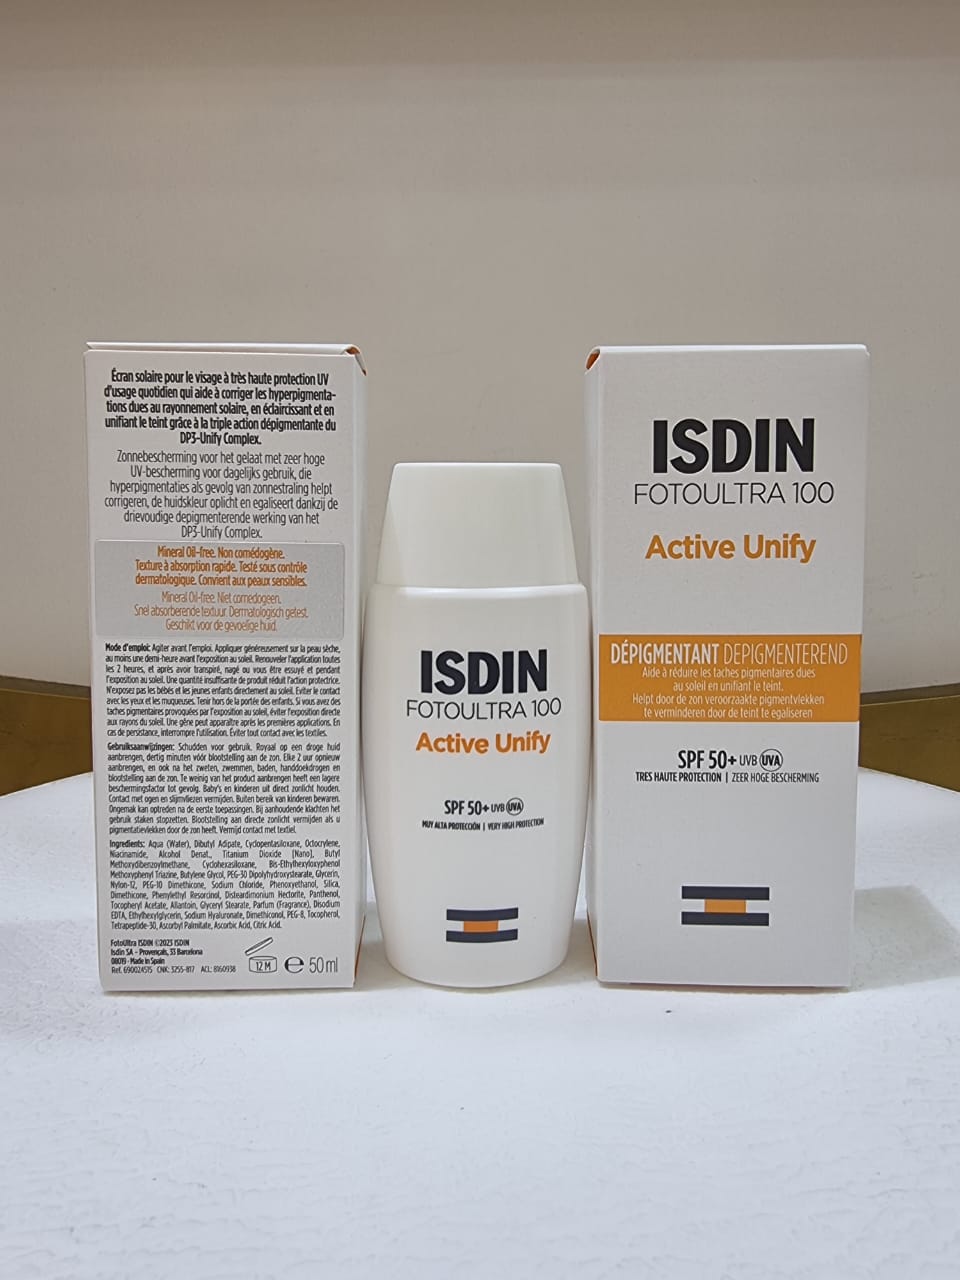 ISDIN FOTOULTRA 100 Active Unify